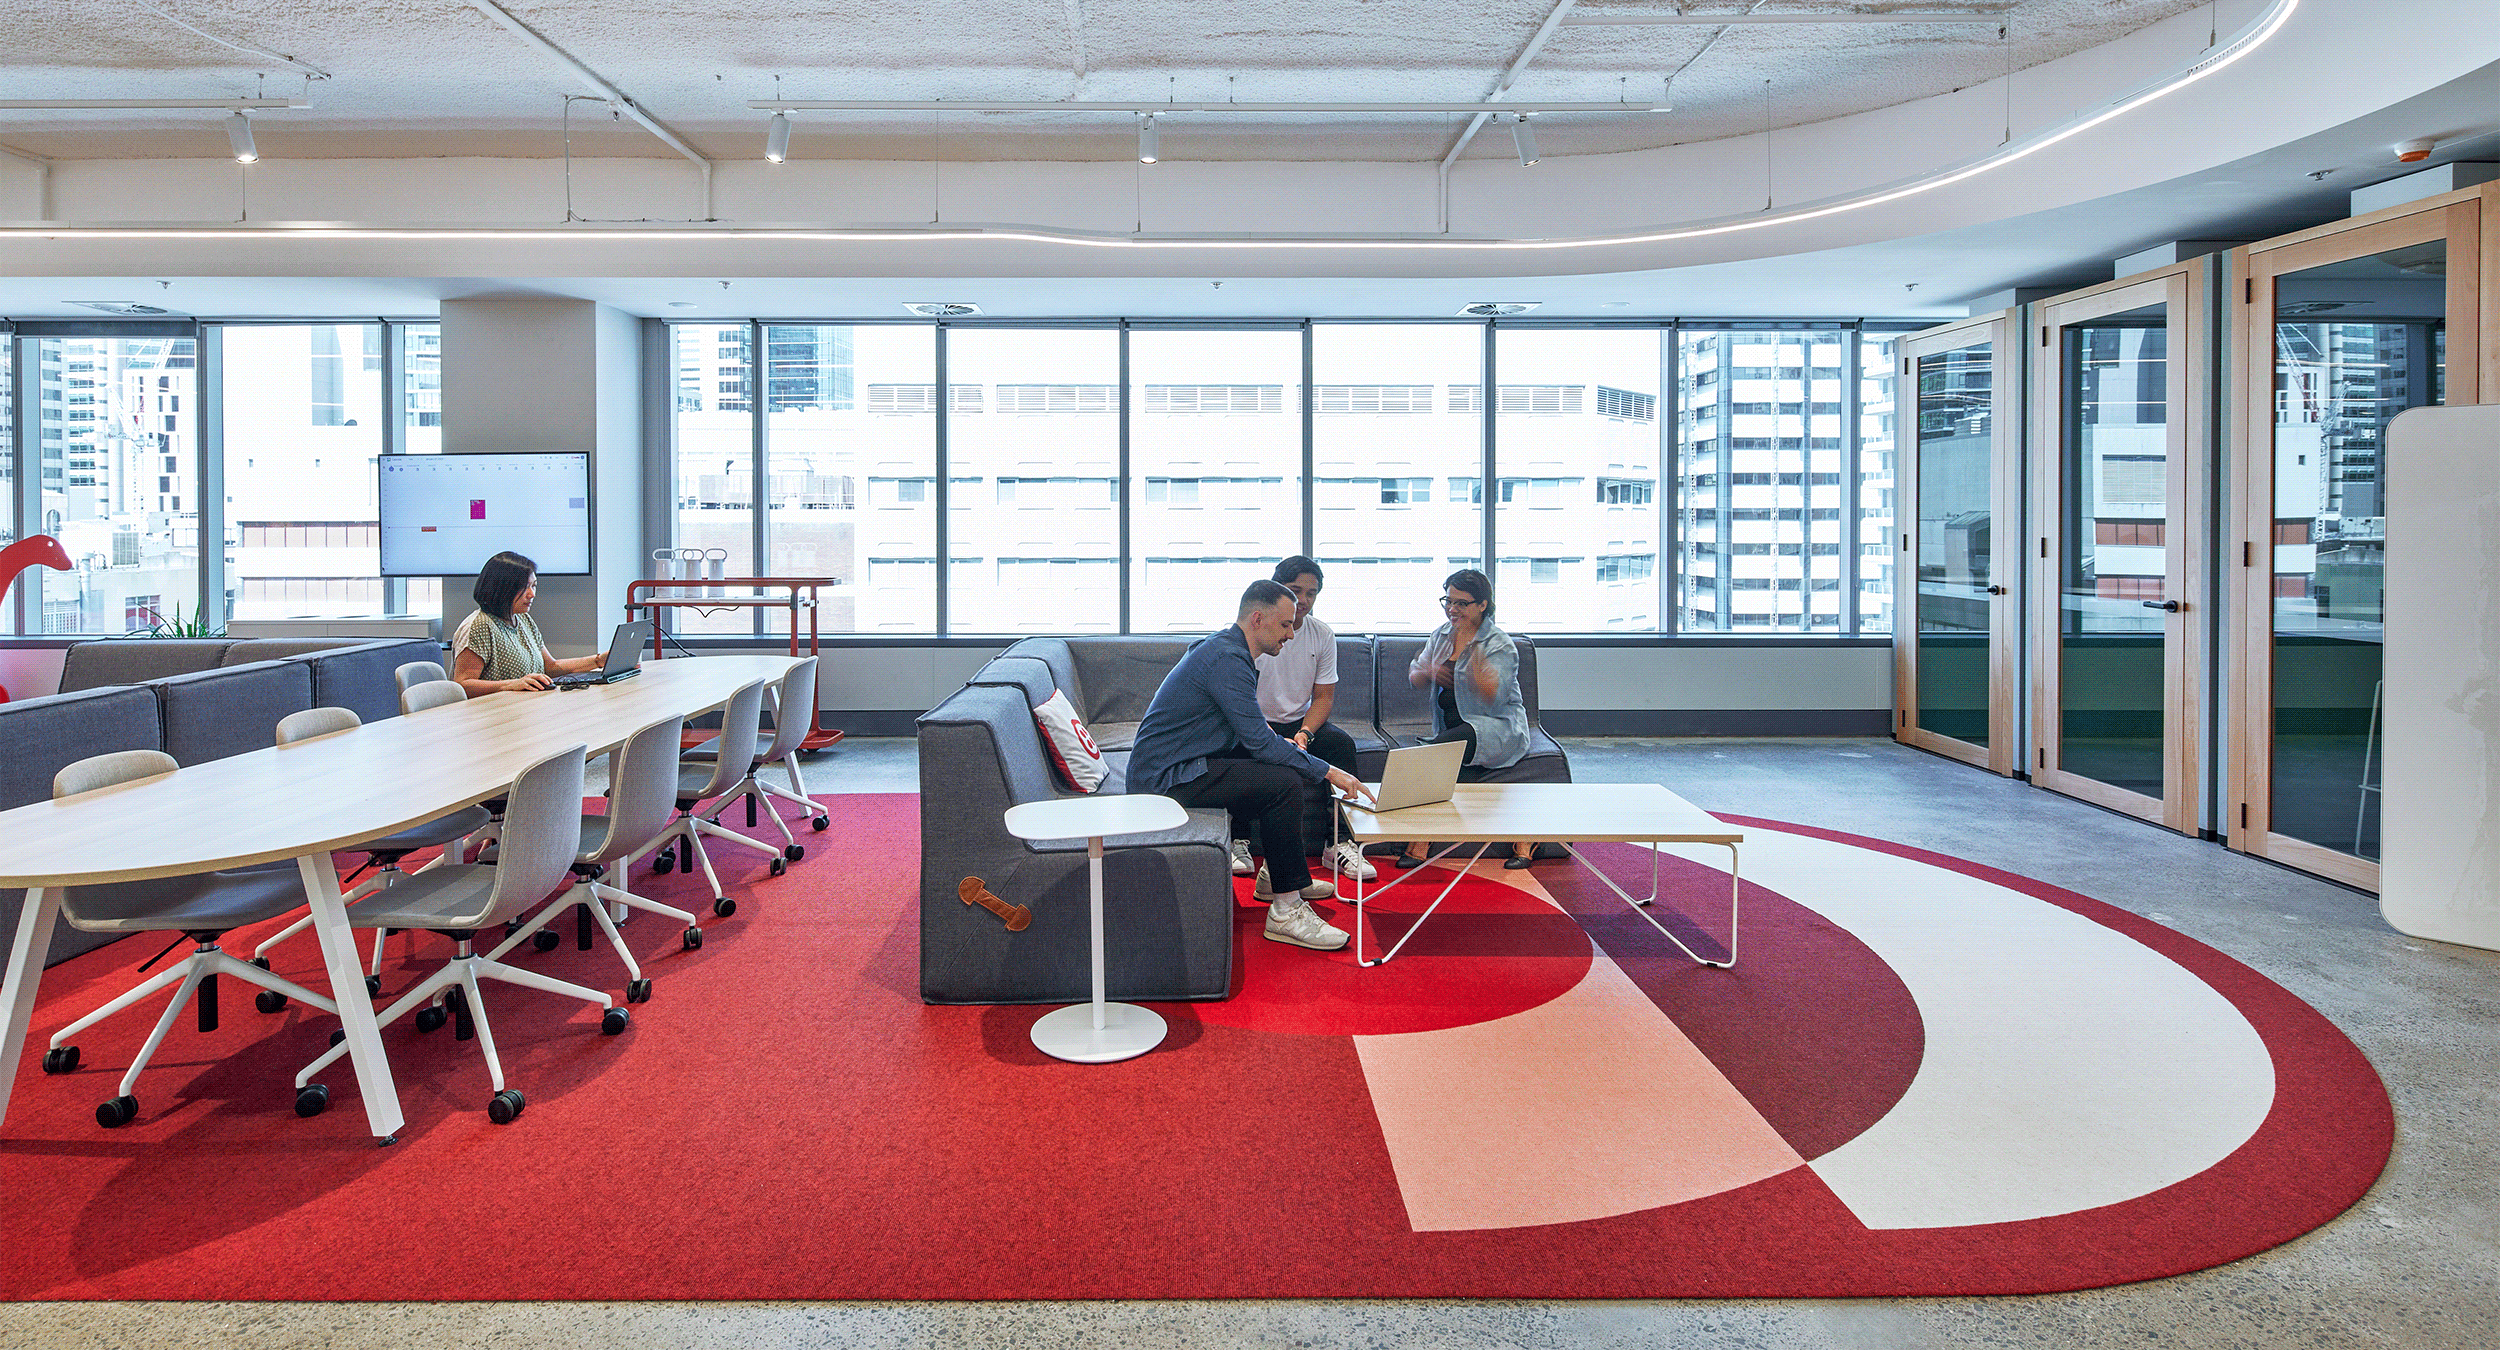 Adaptable and flexible workplace design